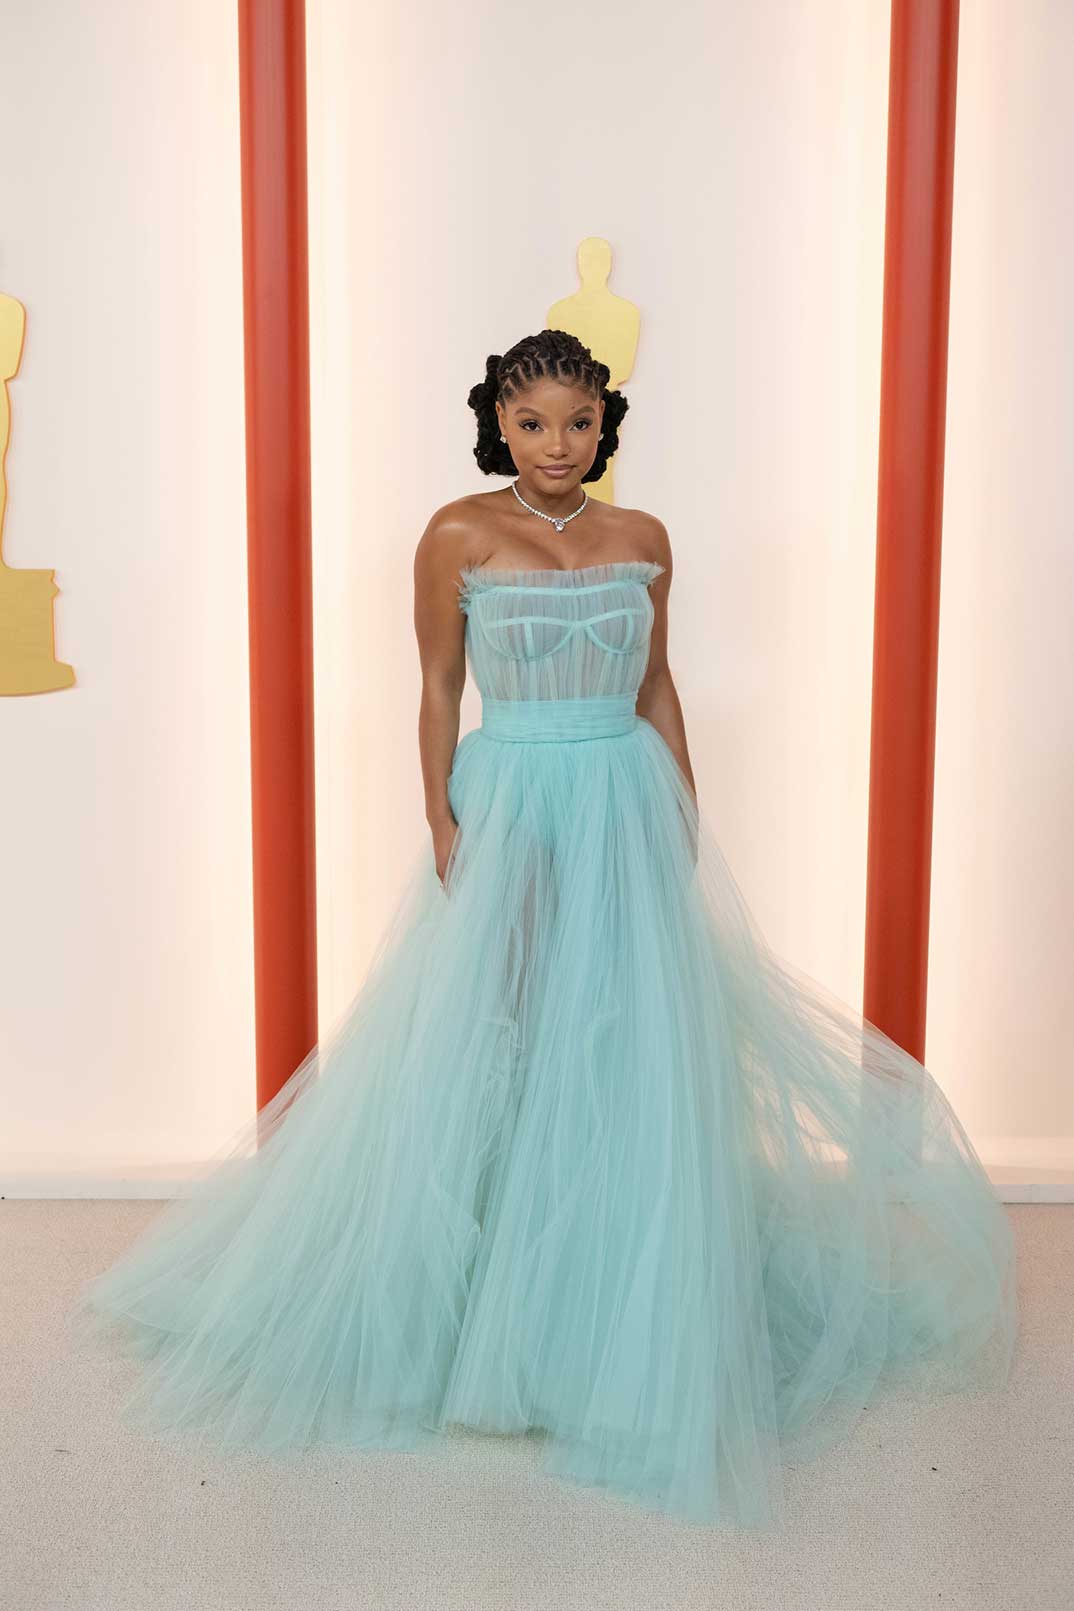 Halle Bailey - Premios Oscar 2023 © 2023 Academy of Motion Picture Arts and Sciences